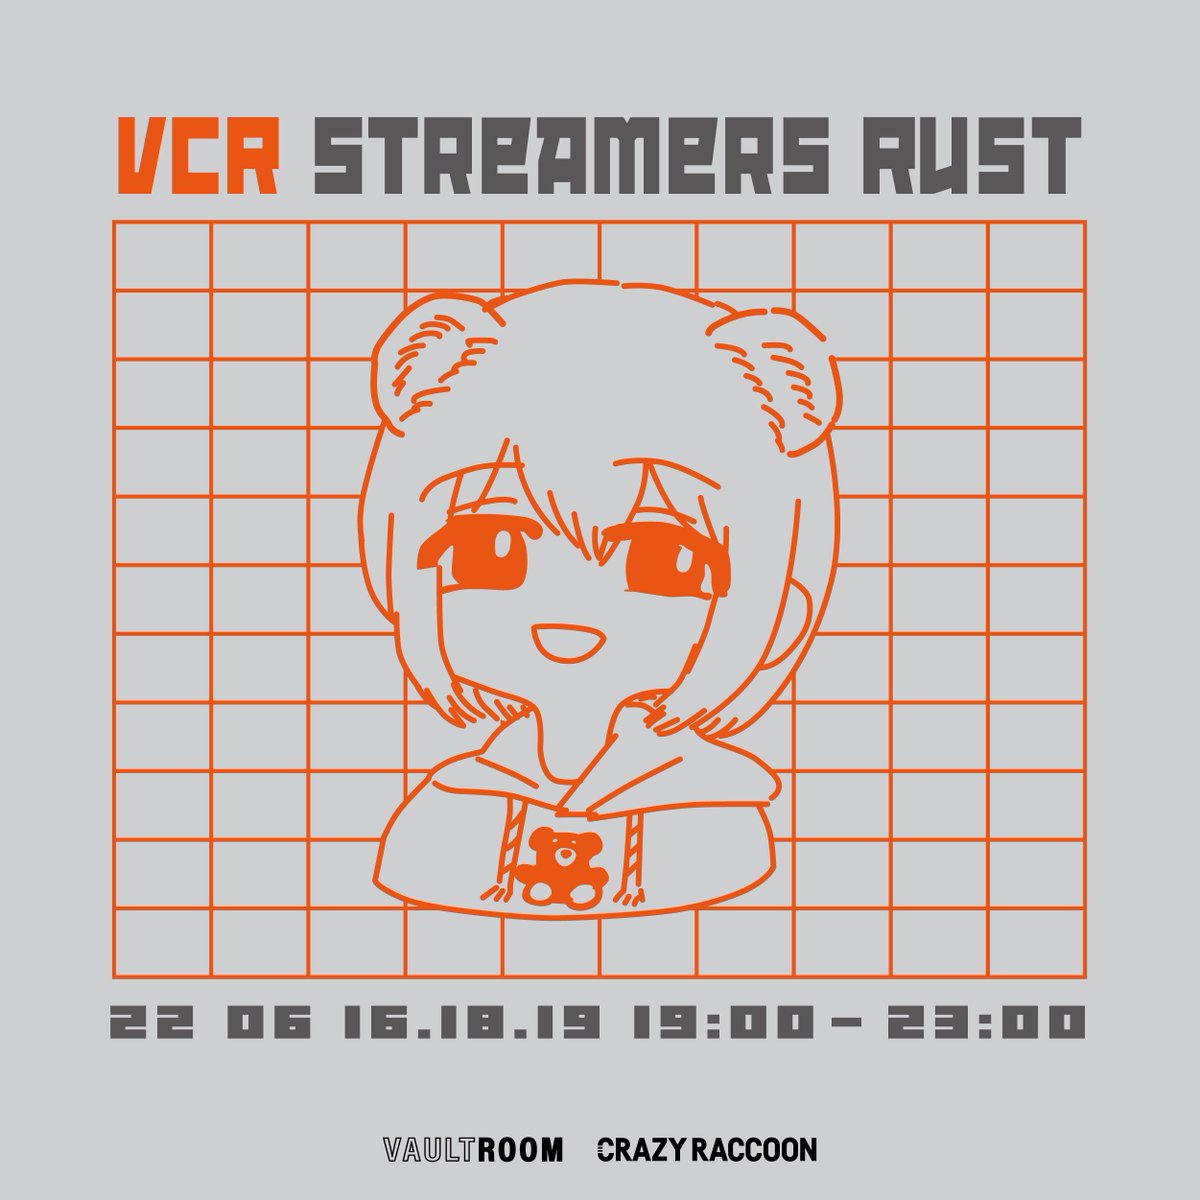 VCR STREAMERS RUST